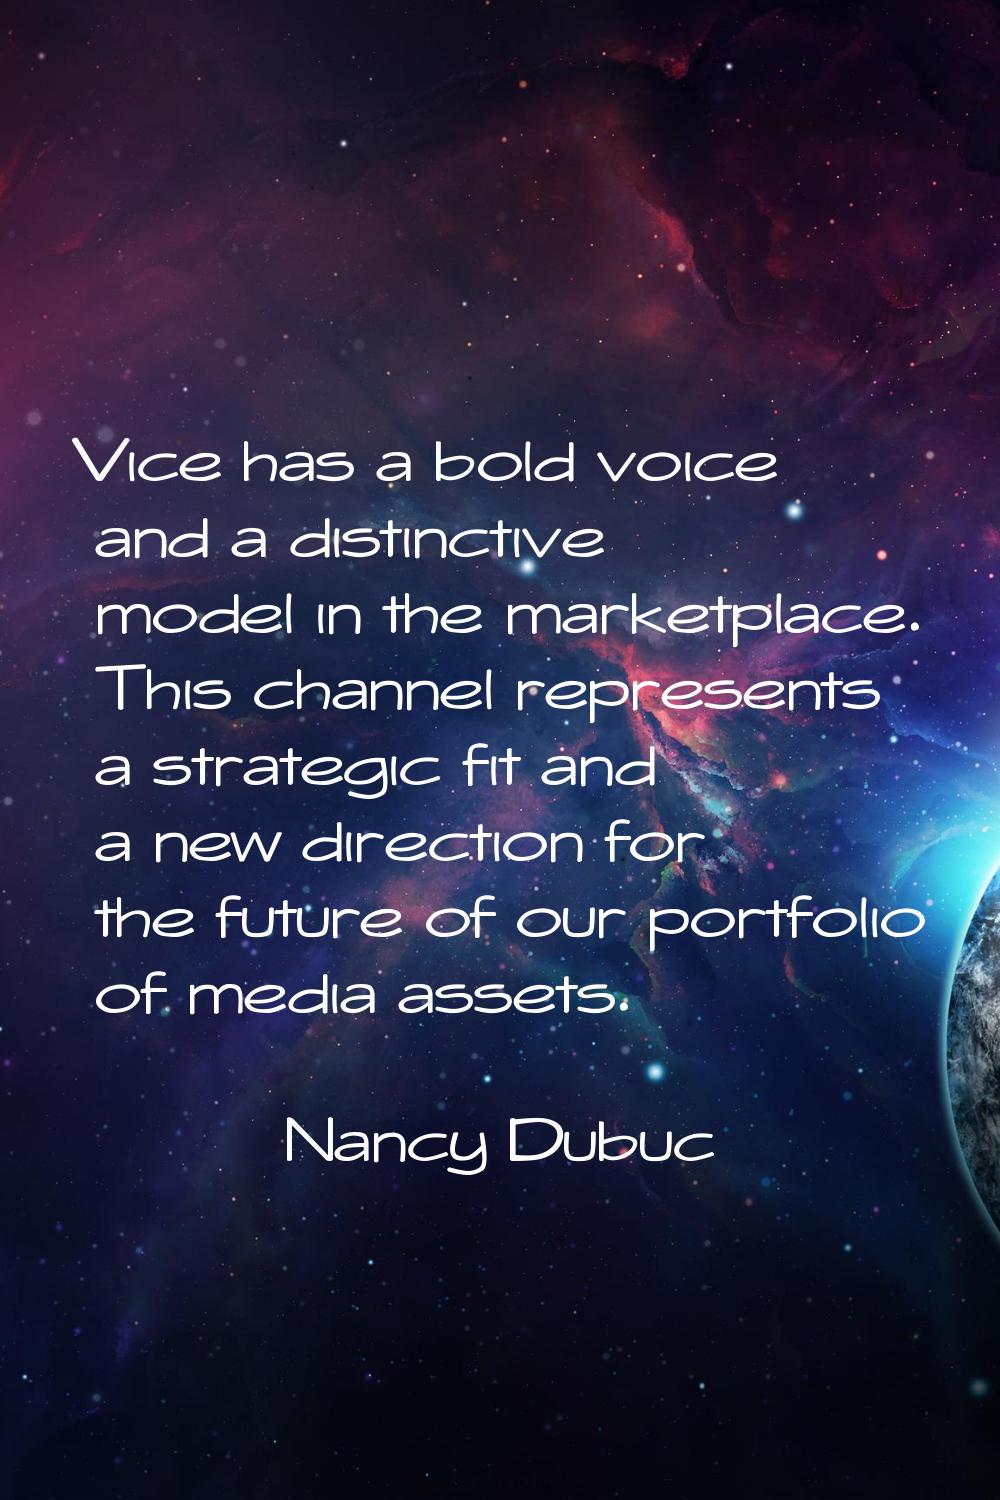 Vice has a bold voice and a distinctive model in the marketplace. This channel represents a strateg